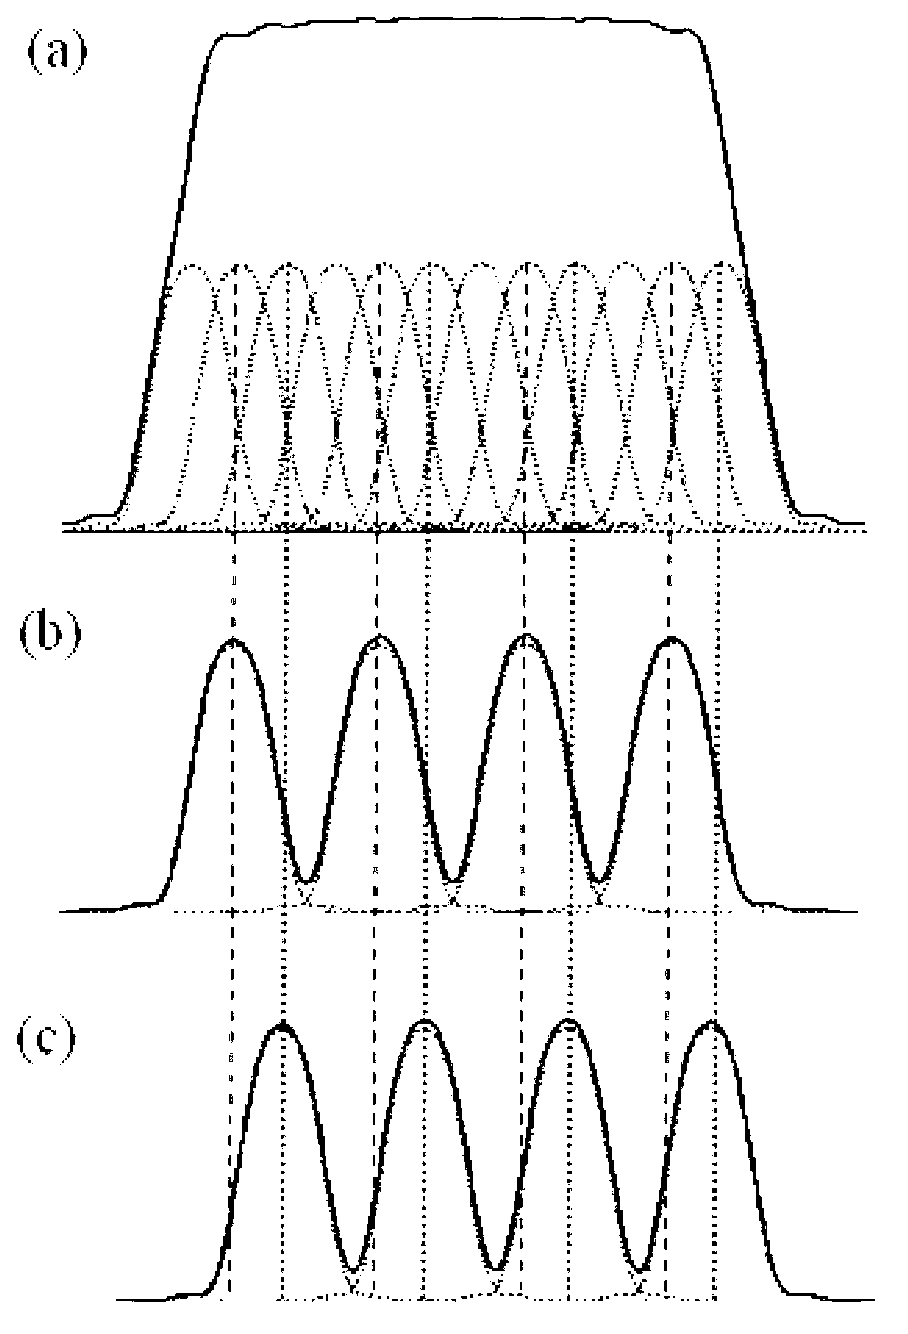 Spectral resolution enhancement method based on Fabry-Perot cavity scanning filtering